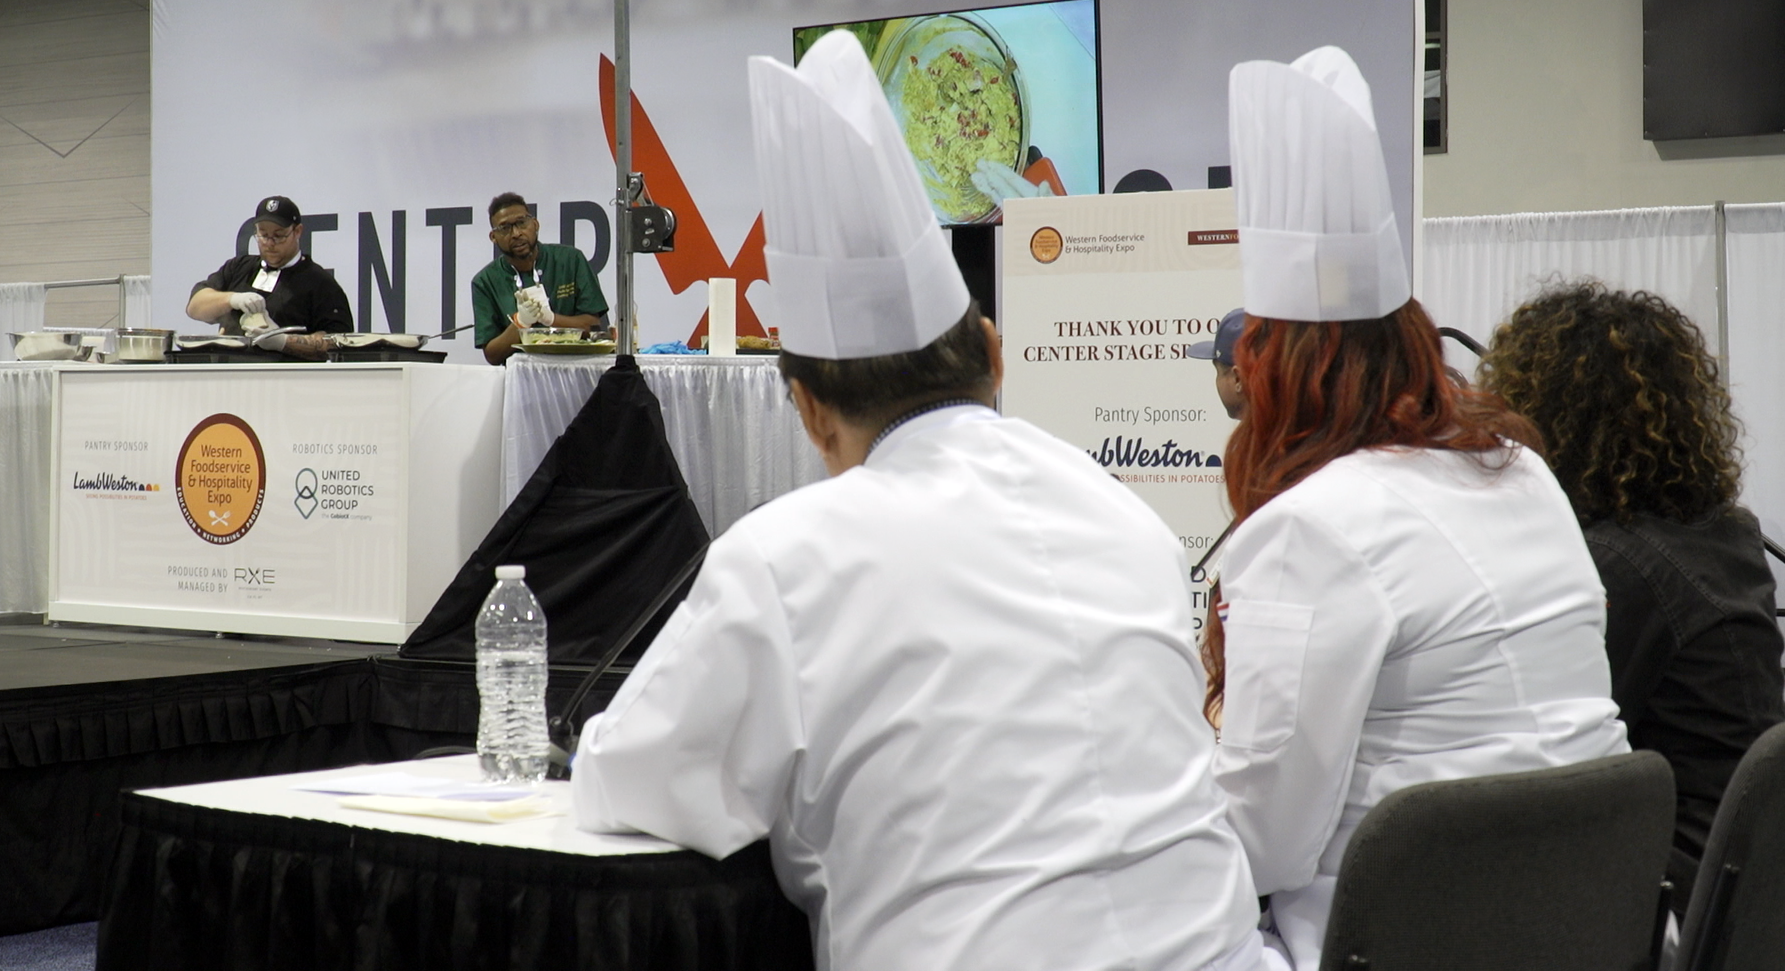 Competitions and Culinary Demonstrations